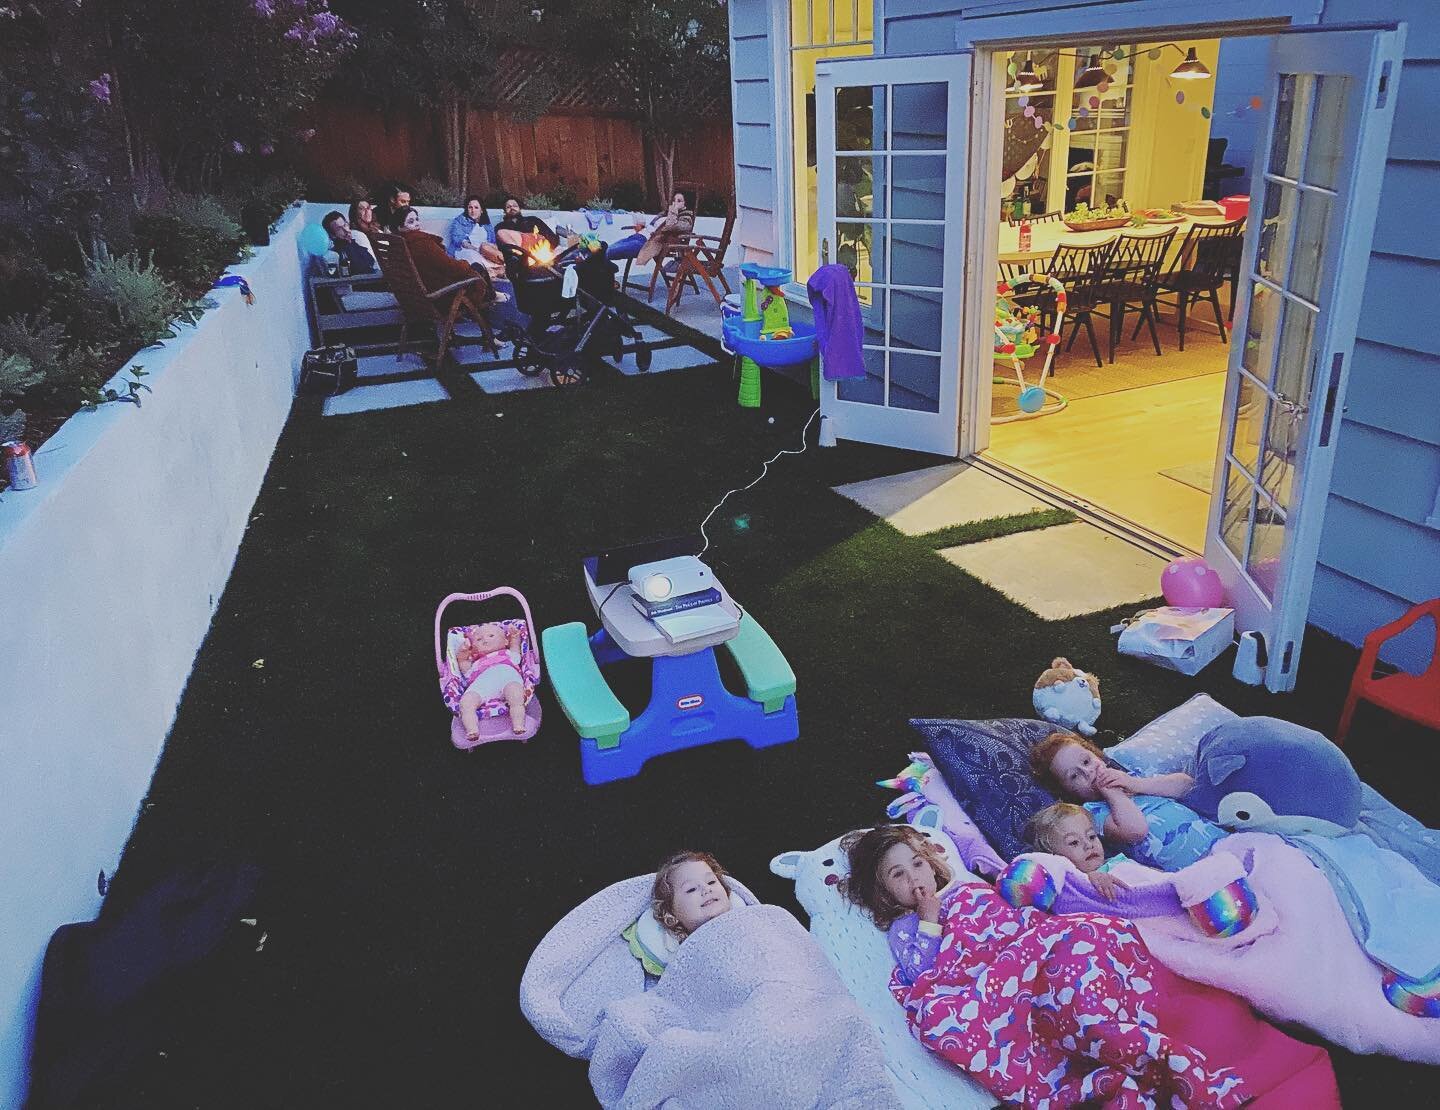 ..nothing makes life more happy than to get a photo from happy clients who spend their first friday night in their new garden space watching movies and hanging by the fire! #safepod #millvalleylandscapes #happyclients #rewardingwork